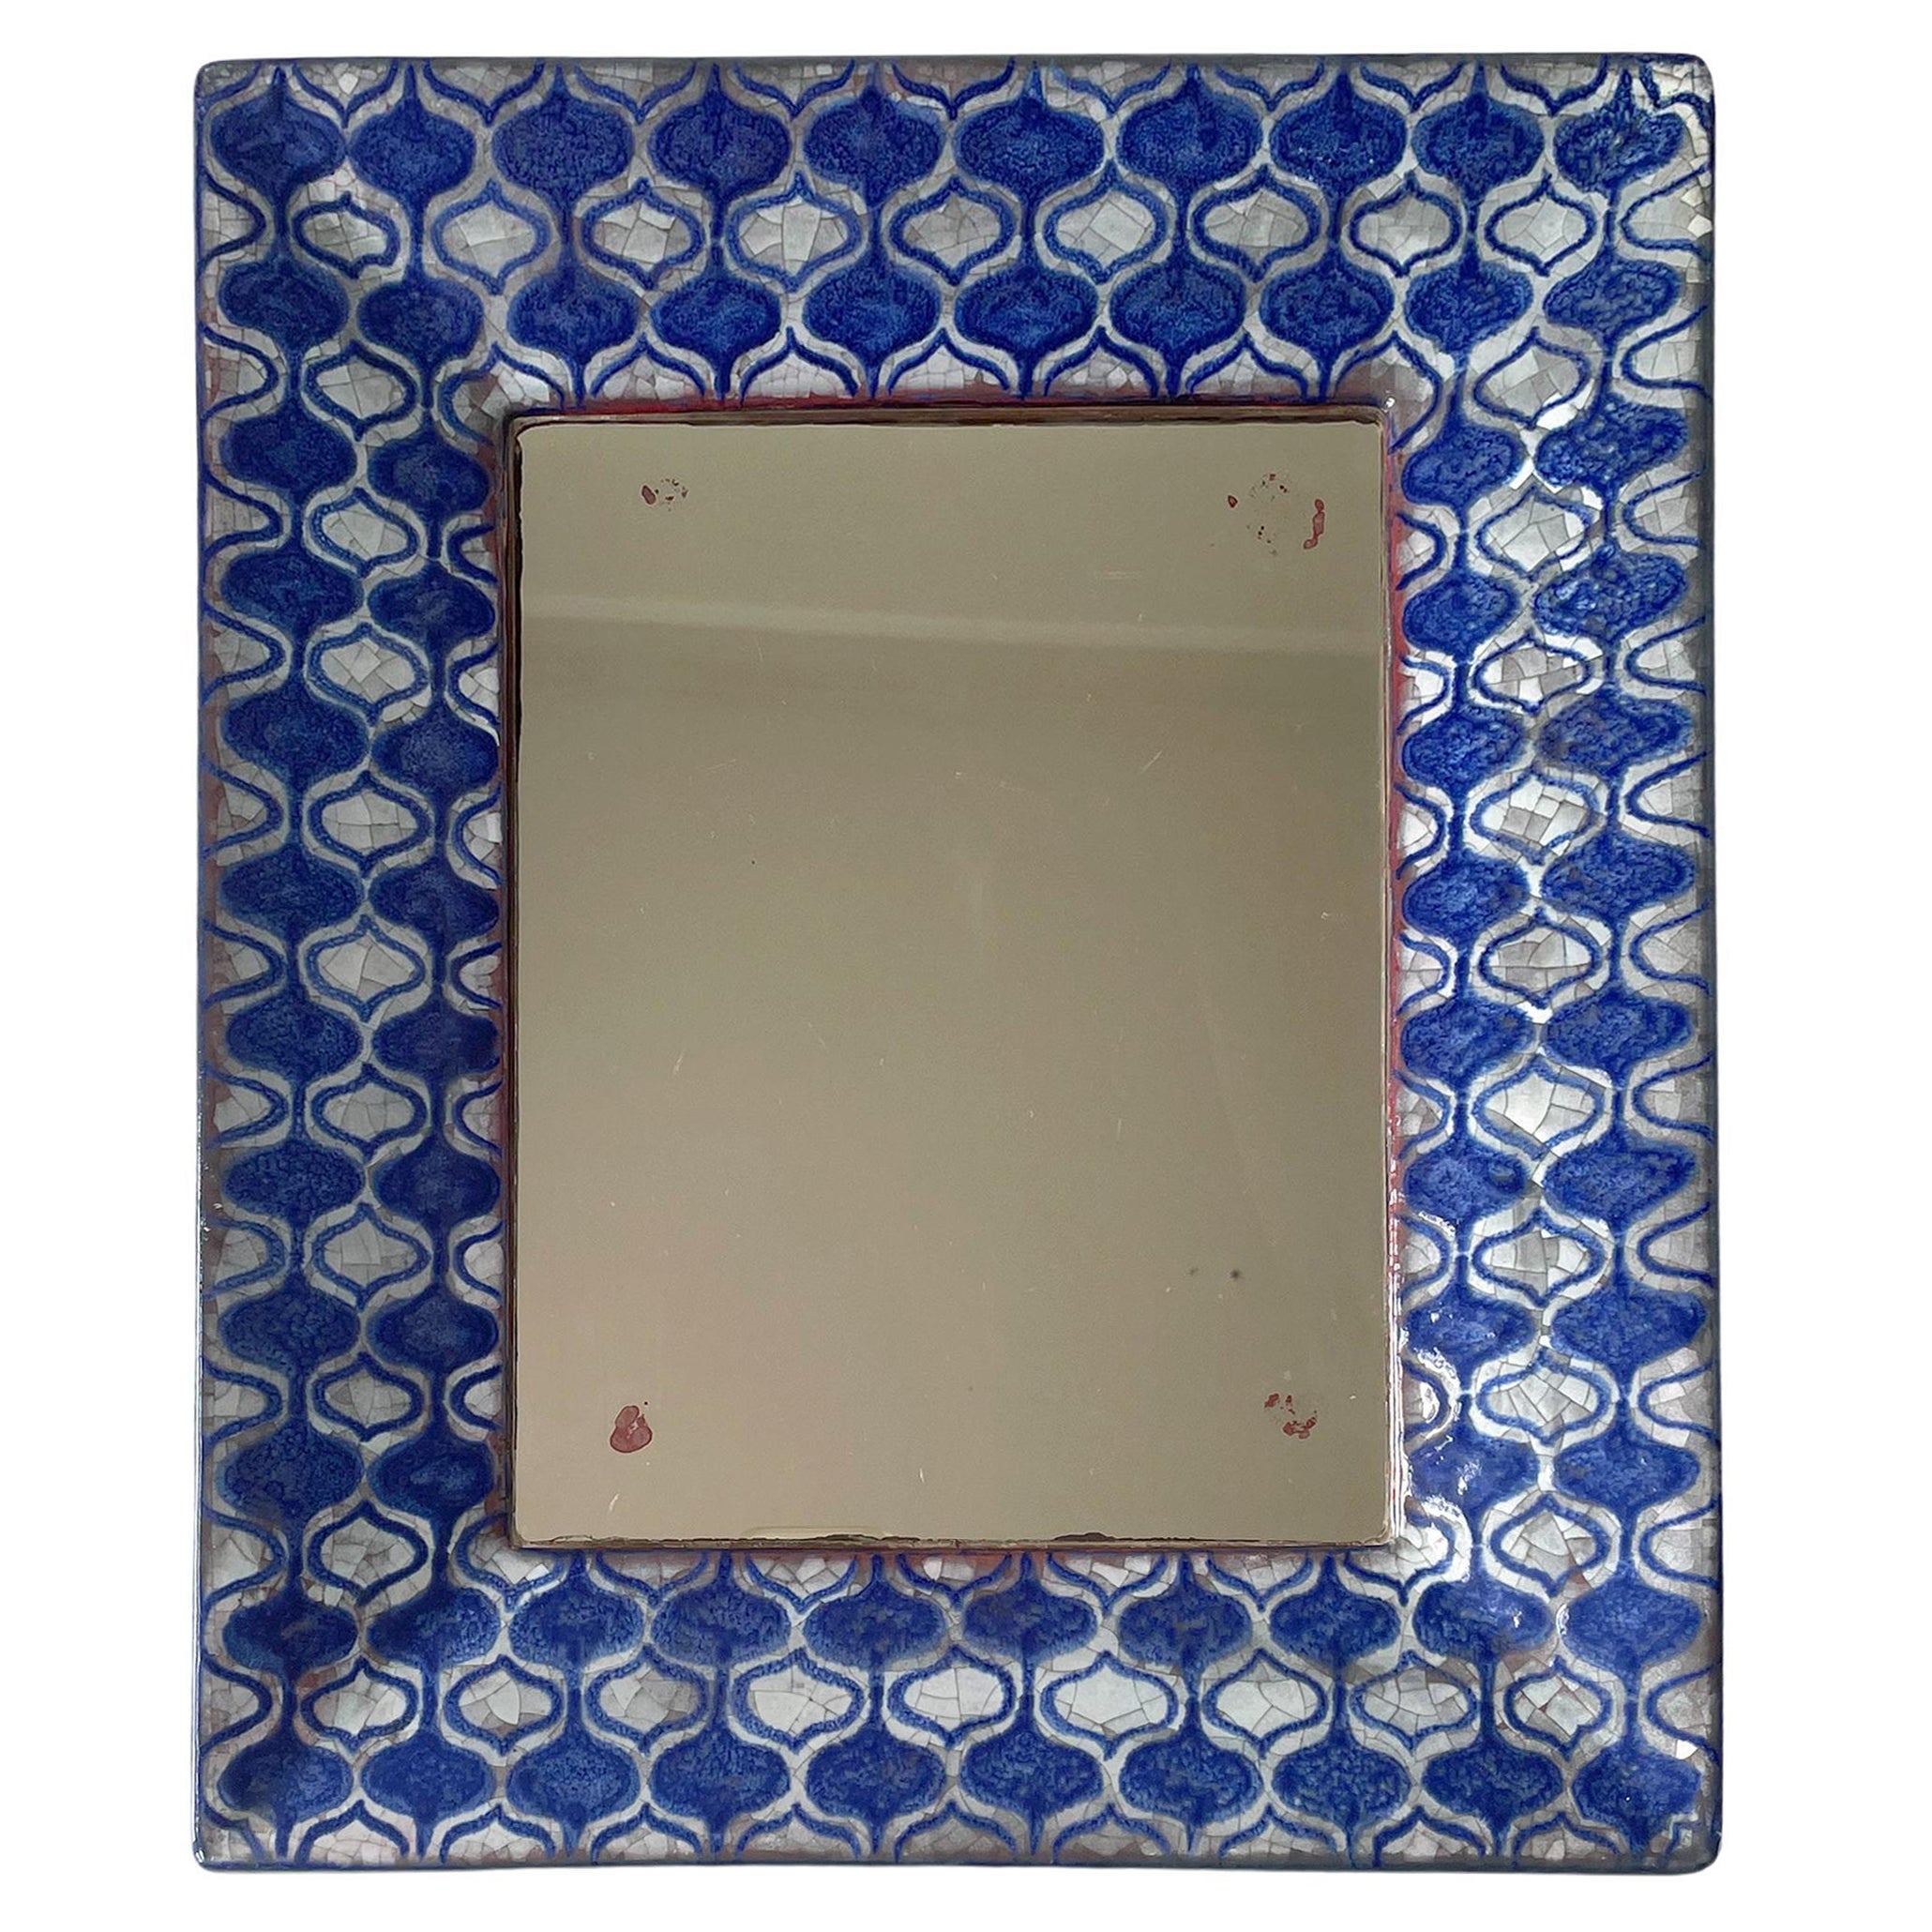 Vintage Persia Glazed Ceramic Wall Mirror, Michael Andersen, 1960s For Sale